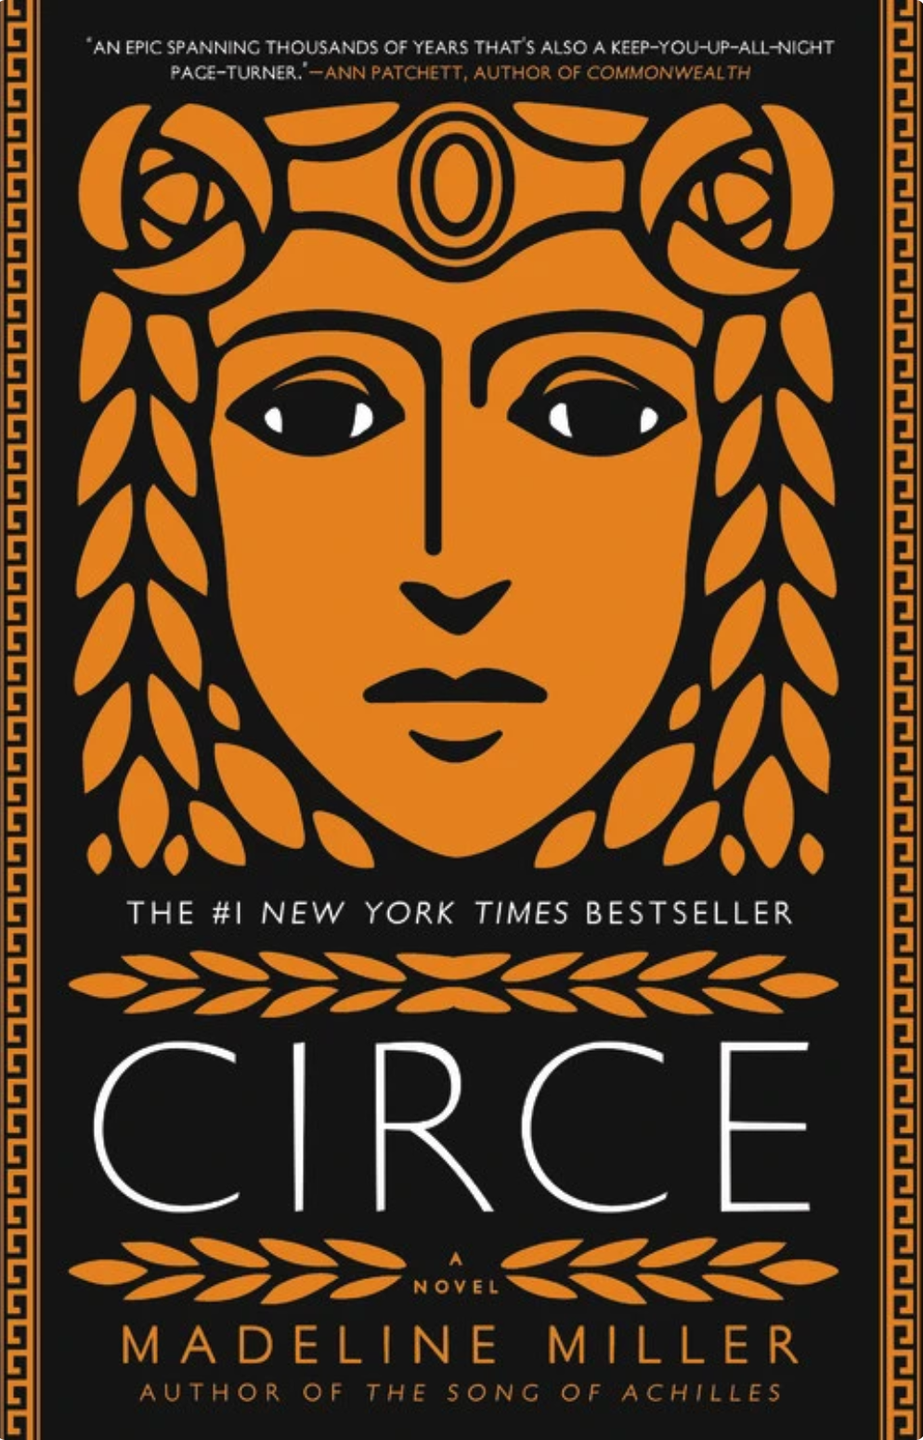 cover image of circe by madeline miller